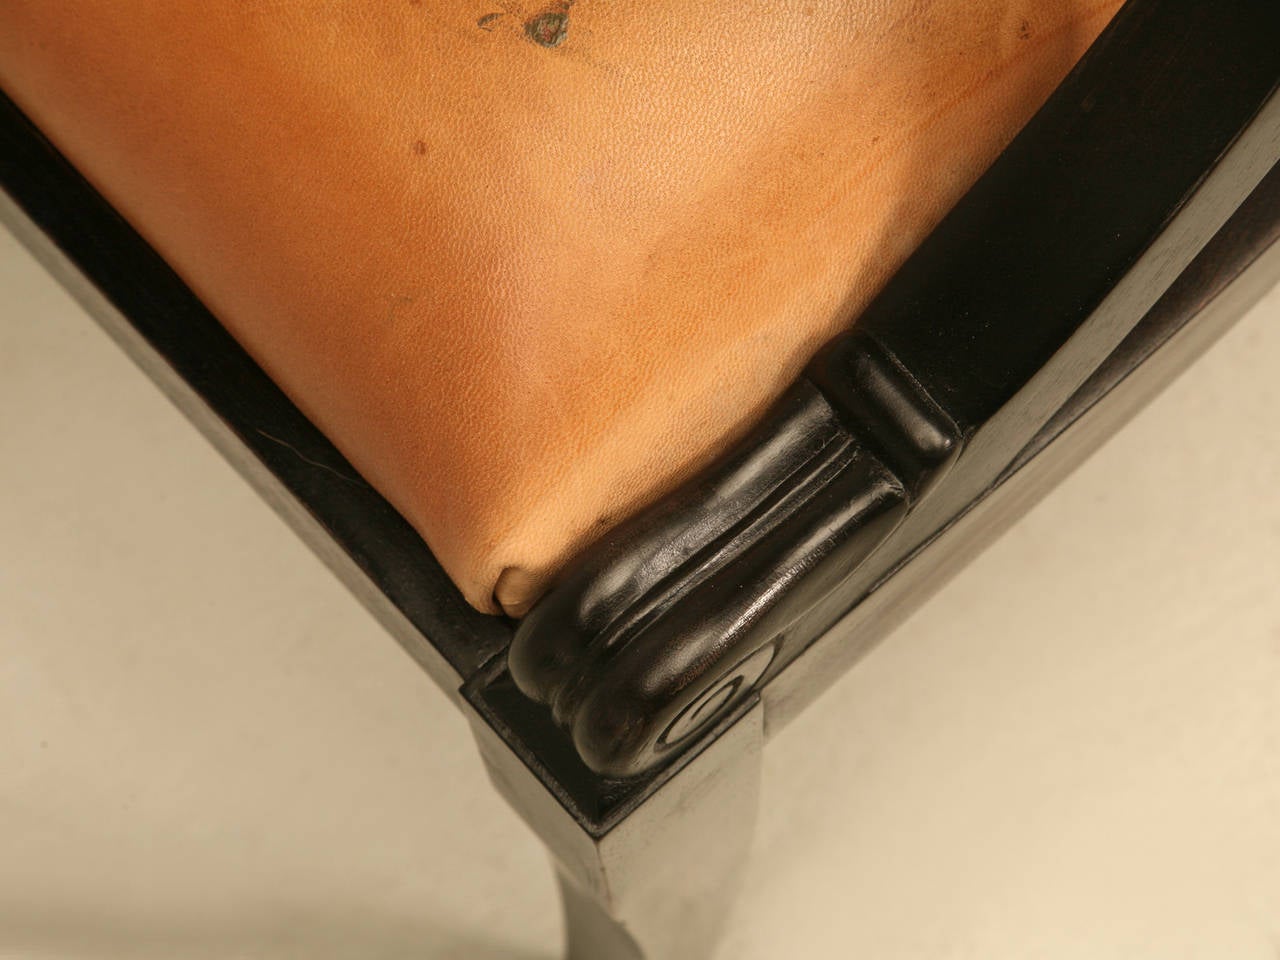 20th Century French Ebonized Mahogany Antique Desk Chair with a Leather Seat Cushion